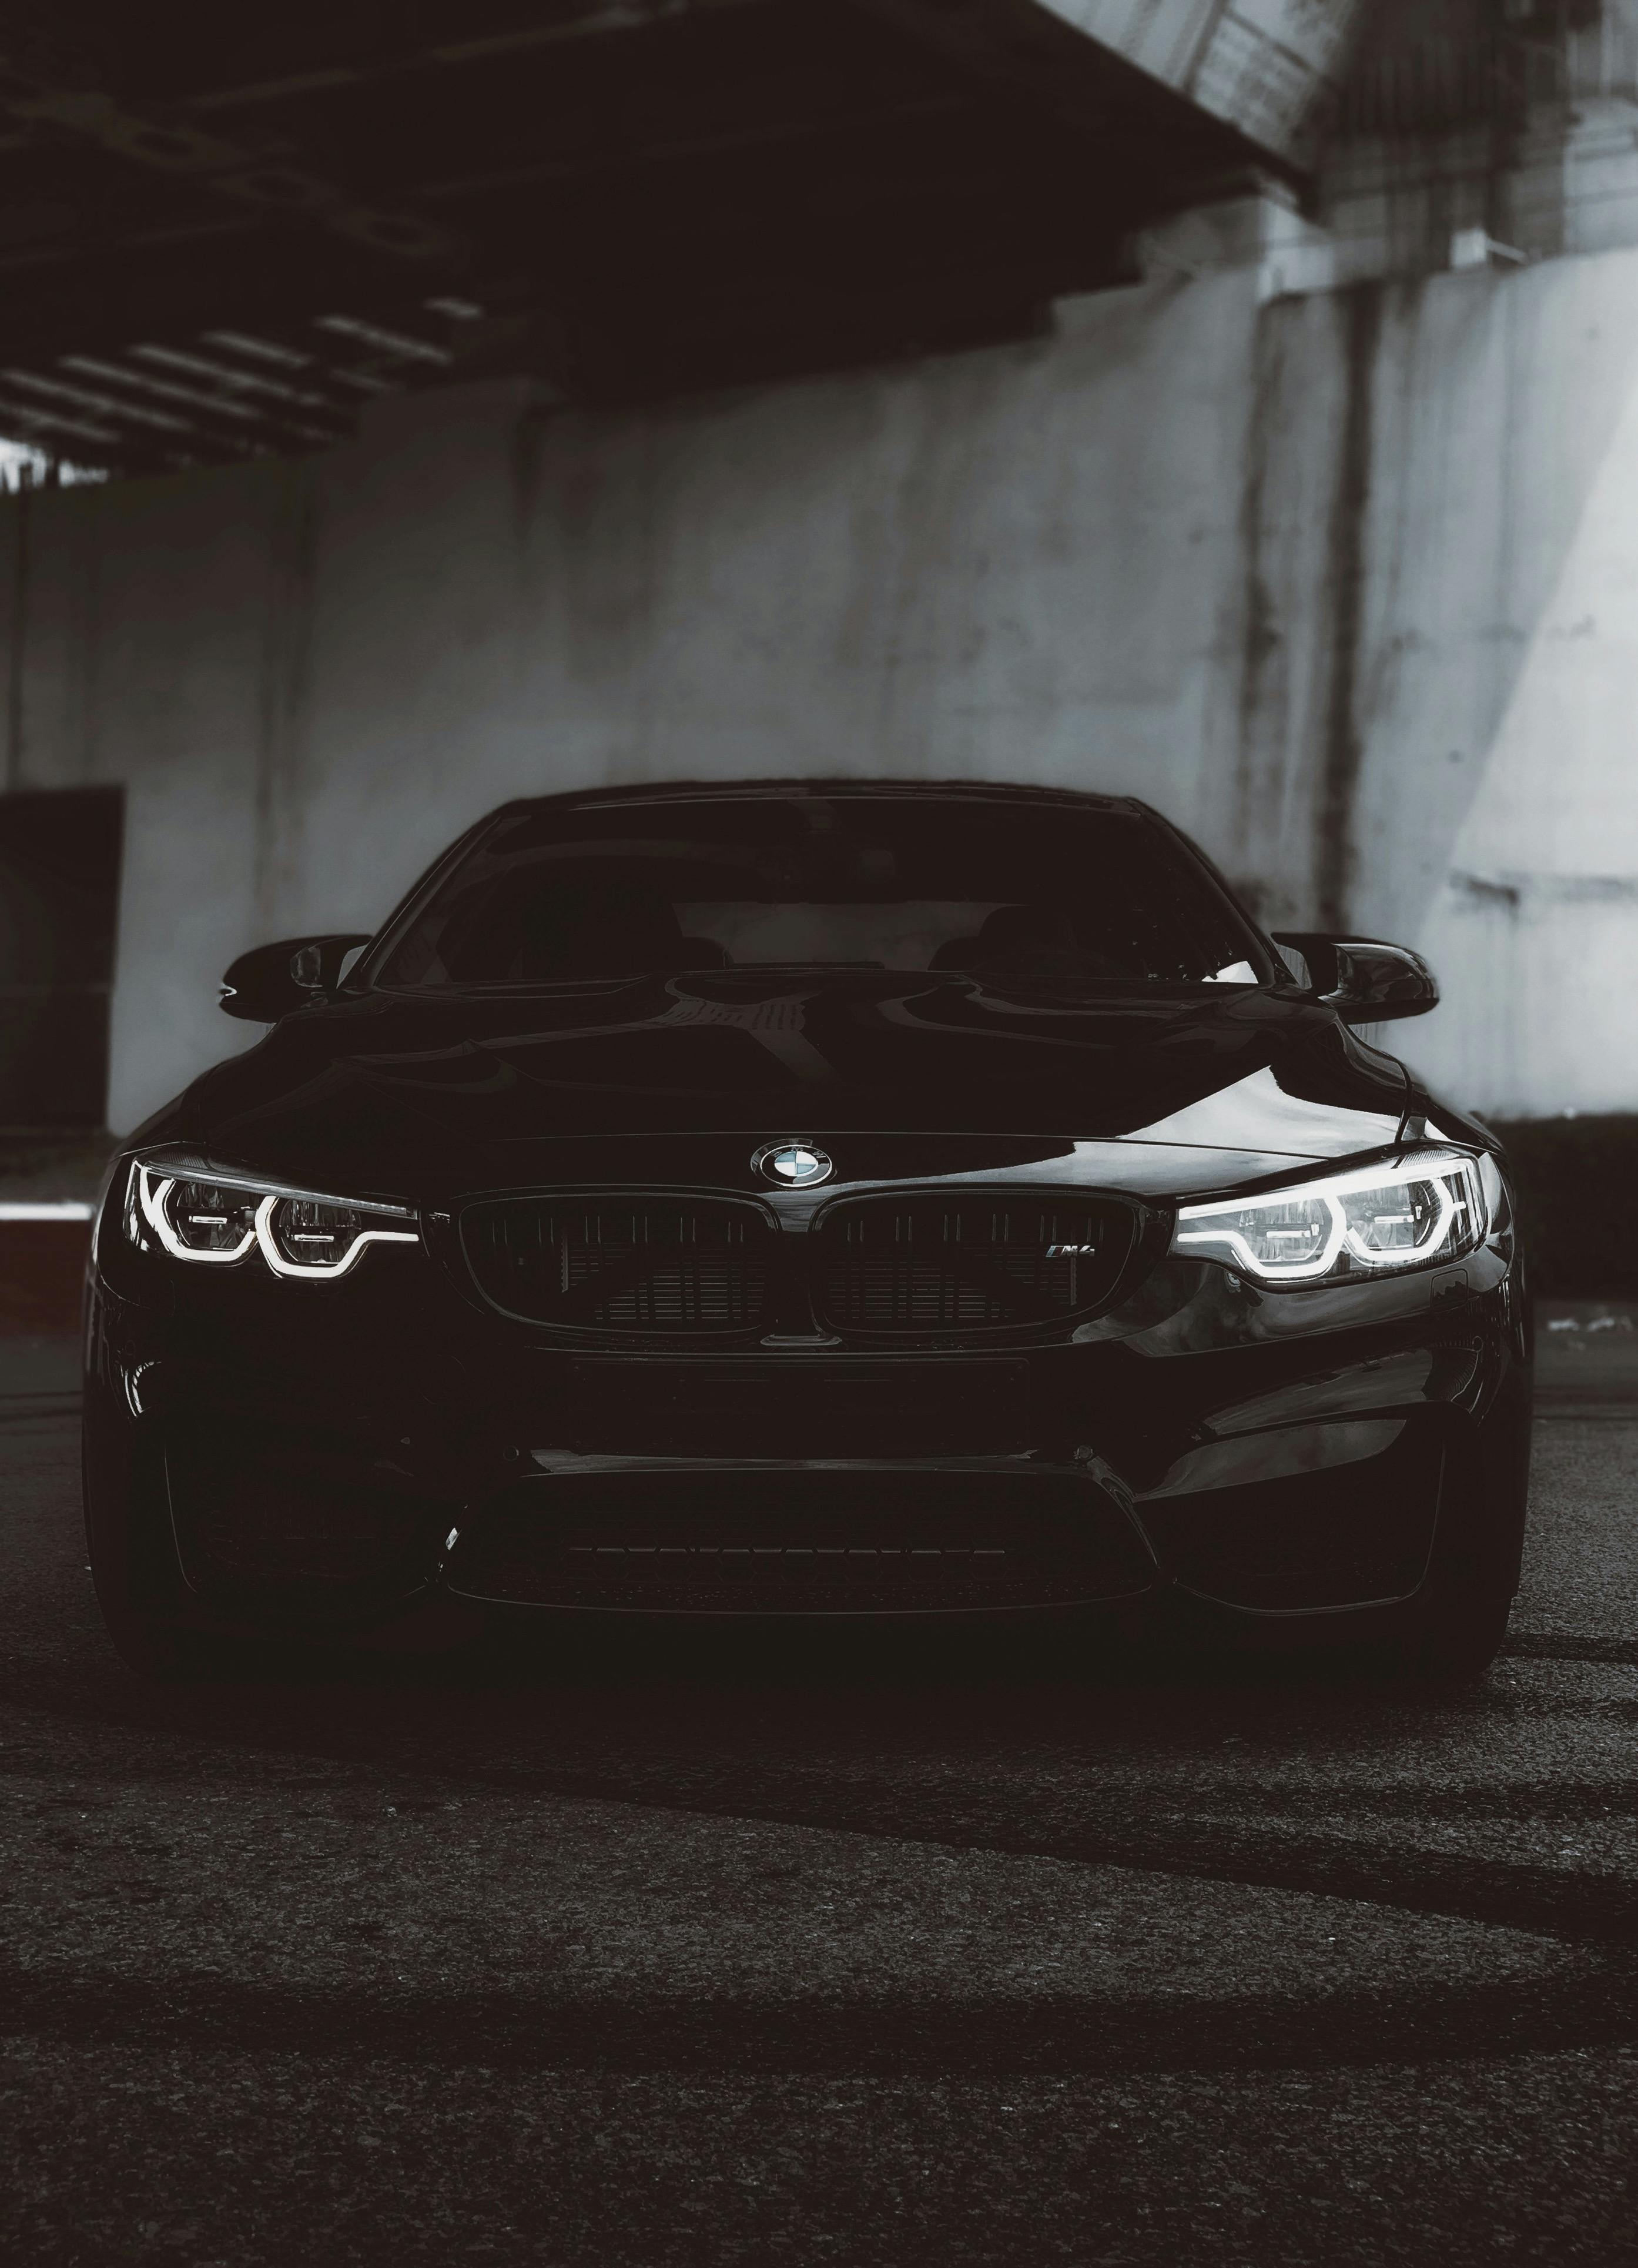 Download BMW M4 Wallpaper by P3TR1T  5e  Free on ZEDGE now Browse  millions of popular bmw Wallpapers and Rington  Bmw wallpapers Best  luxury cars Super cars